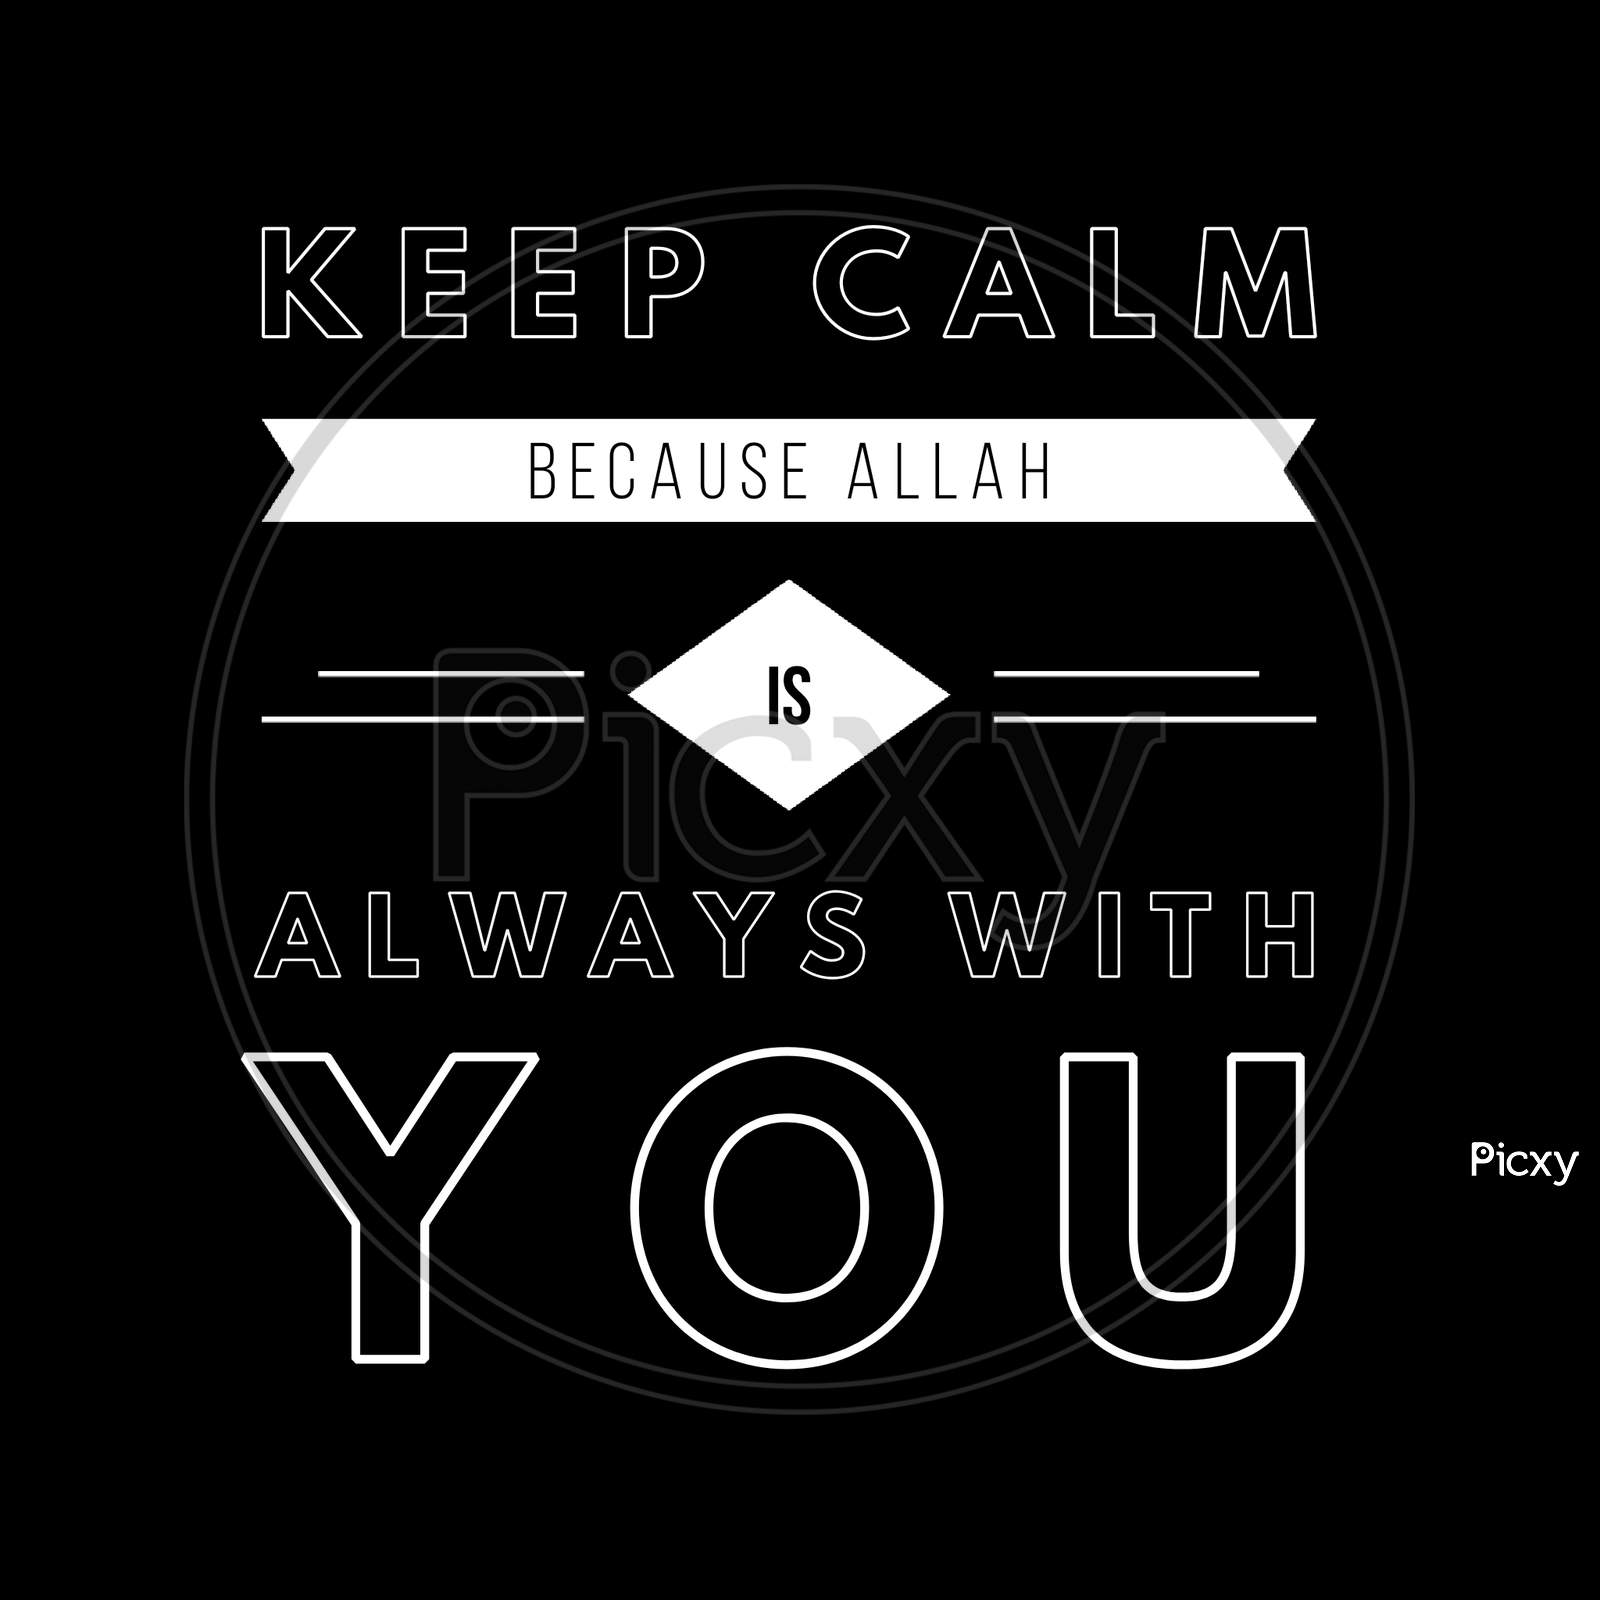 Image With A Text "Keep Calm Because Allah Is Always With You"